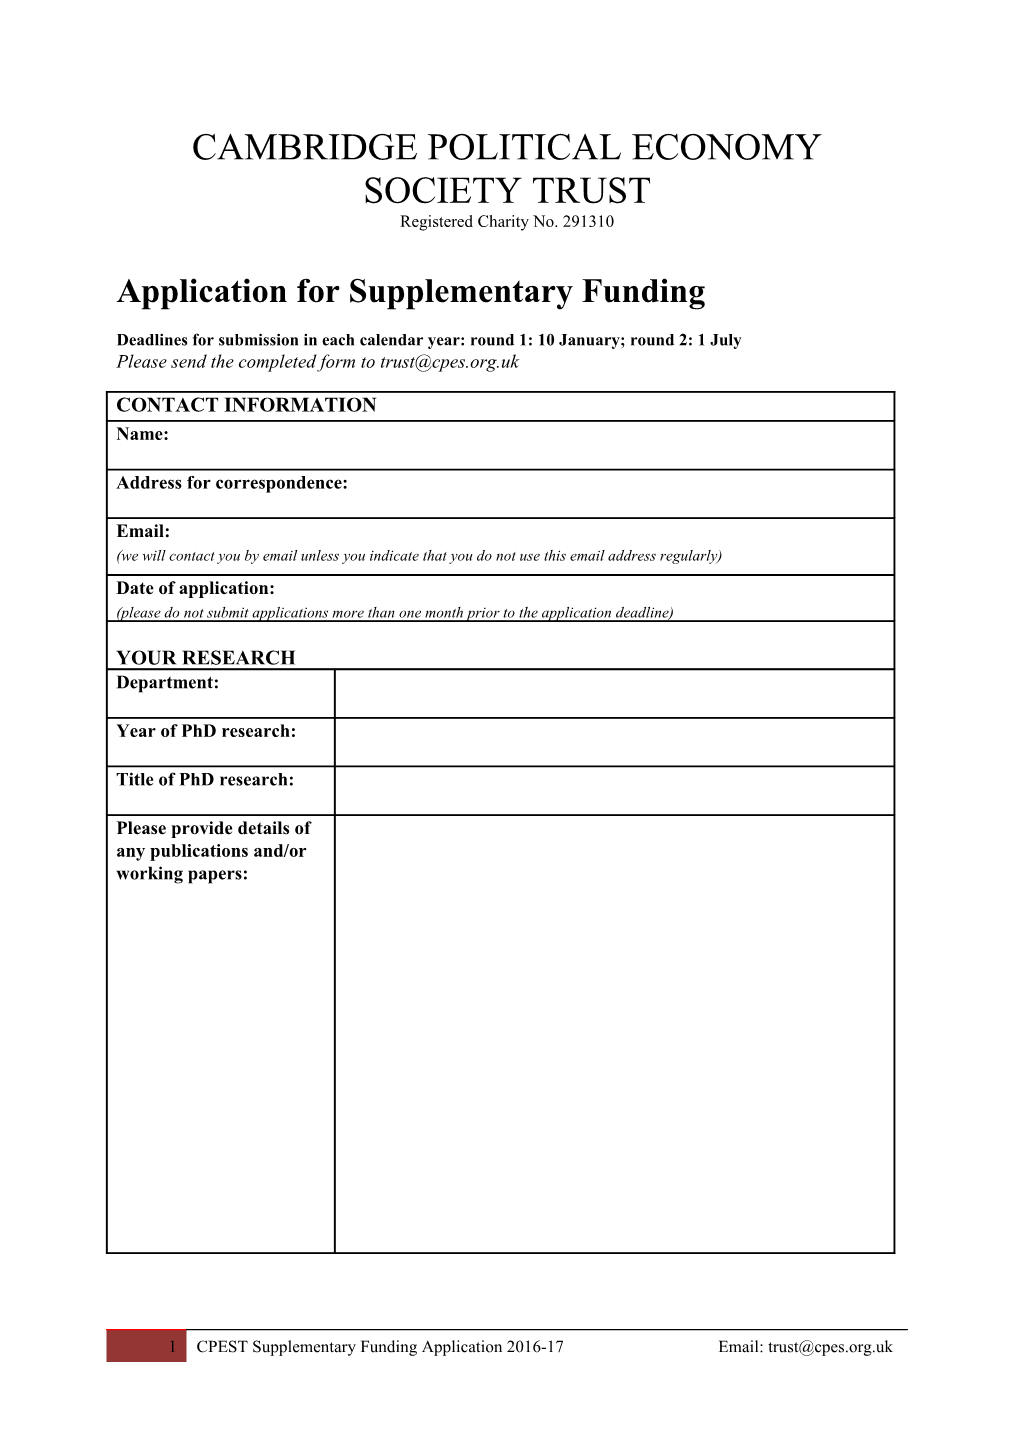 Application for Supplementary Funding